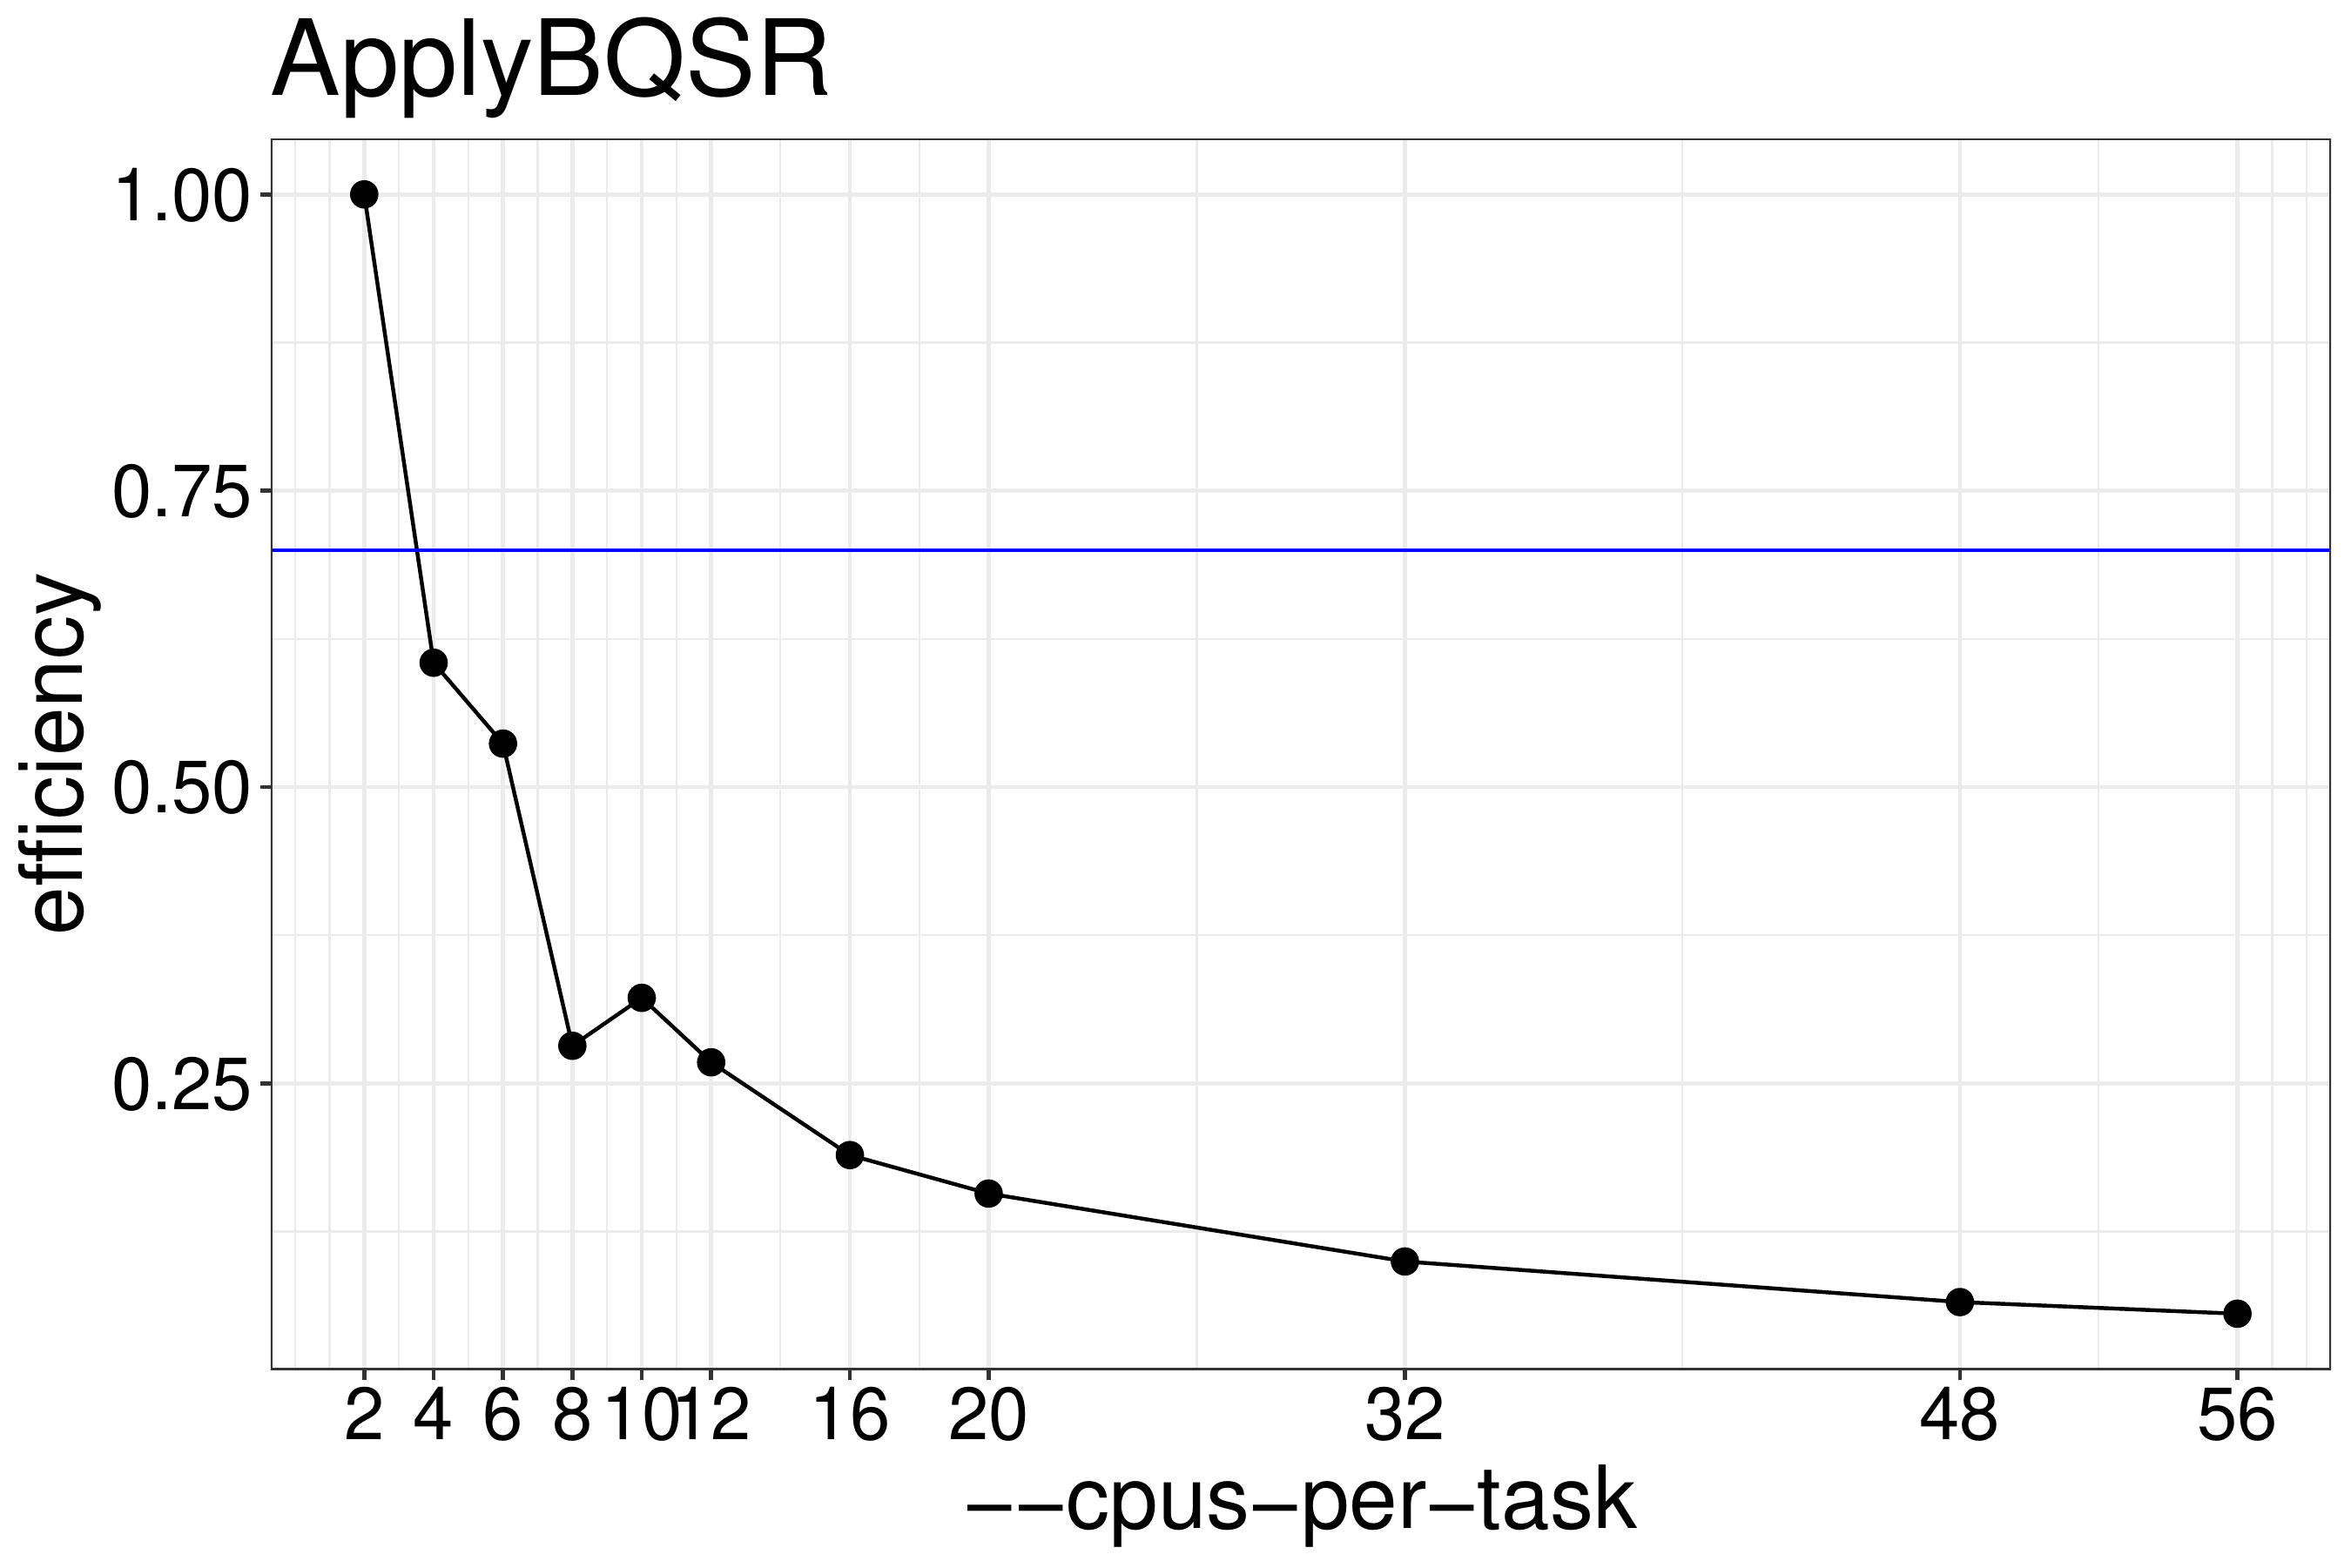 ApplyBQSR efficiency calculated from runtimes